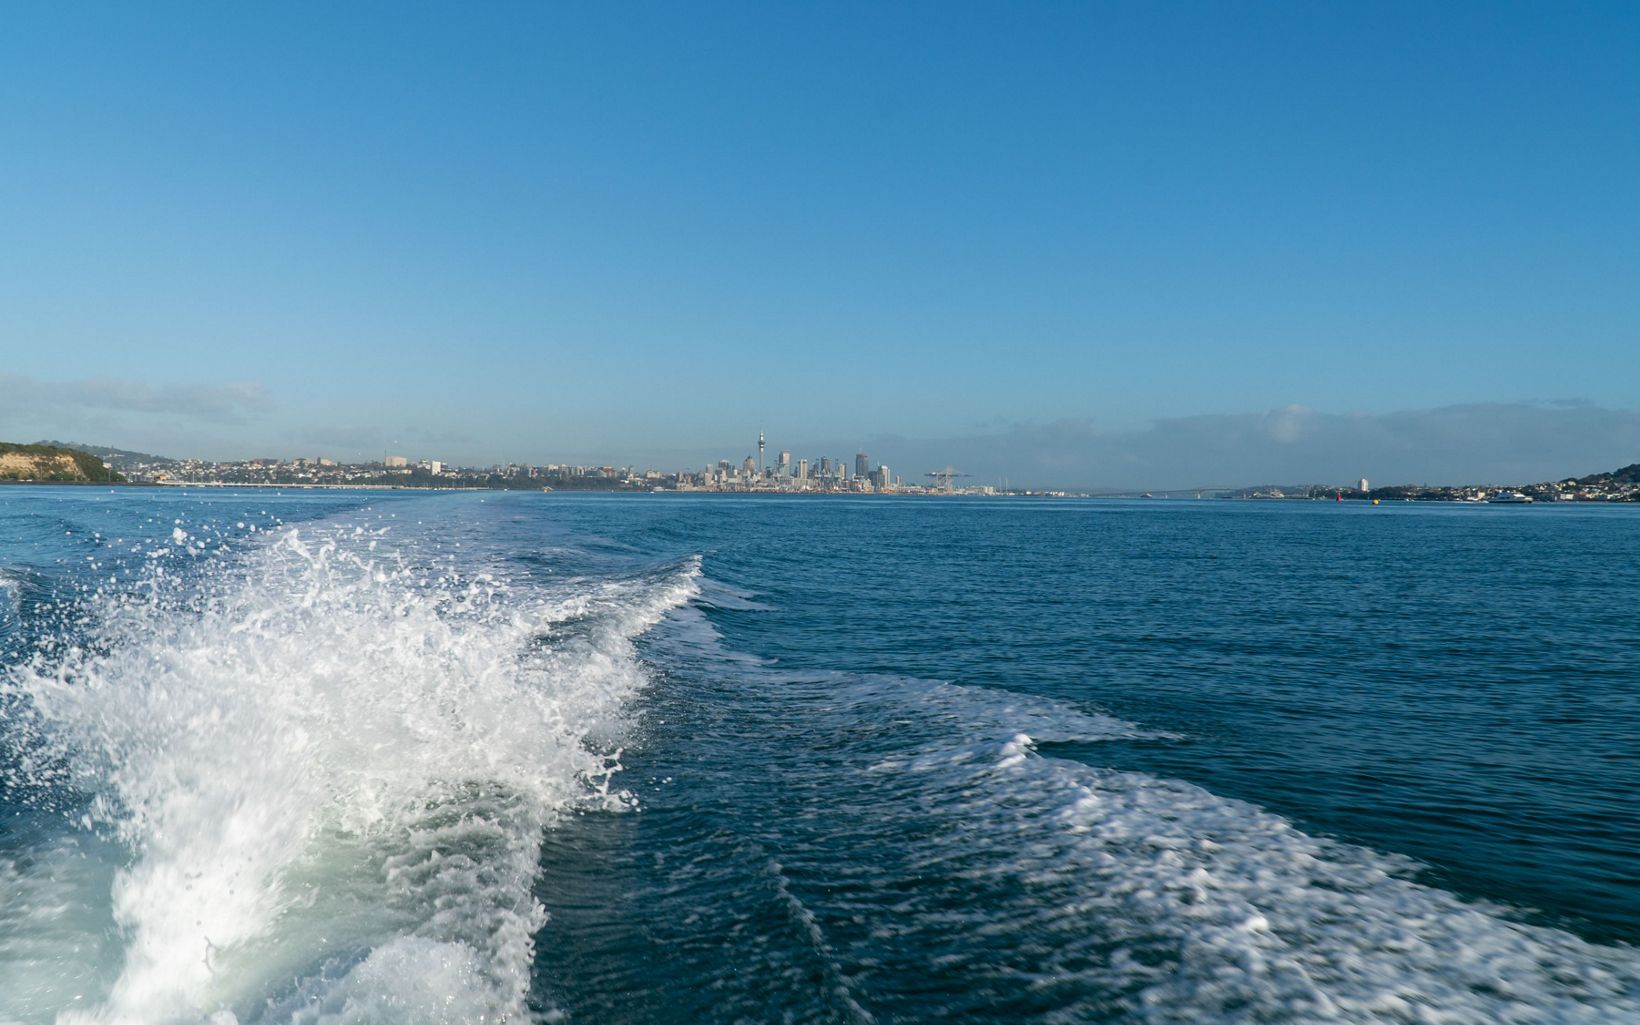 Island Bound It was early morning, the air was crisp and clean, and the water was like glass. A picturesque day to be exploring the islands that surrounded the city of Auckland. © Ethan Kearns/The Nature Conservancy